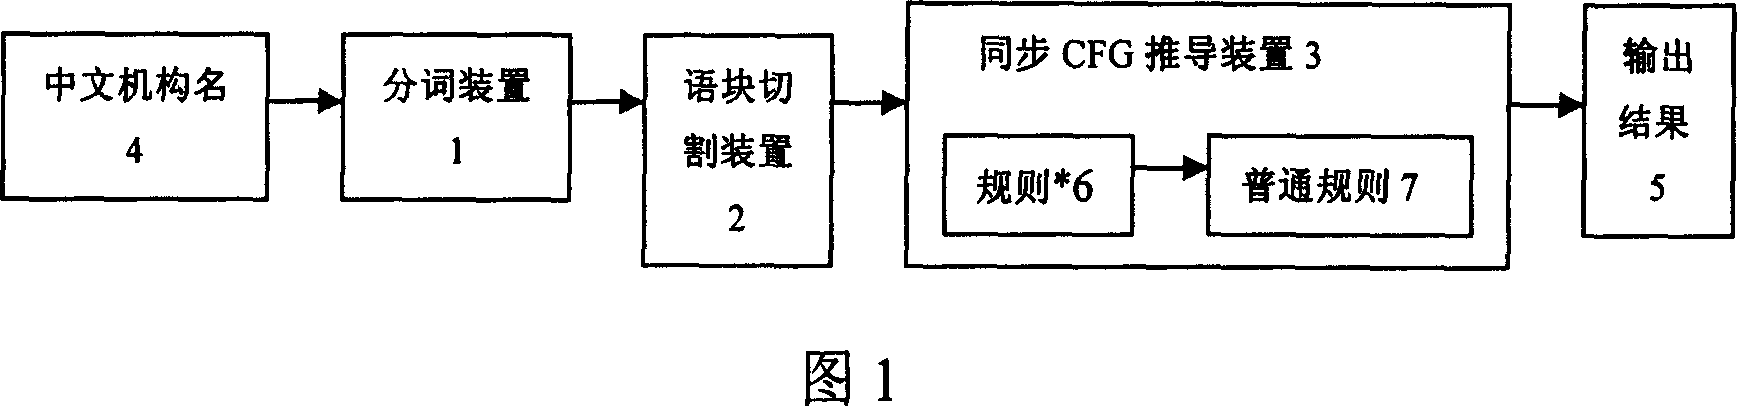 Method and device for translating Chinese organization name based on word block